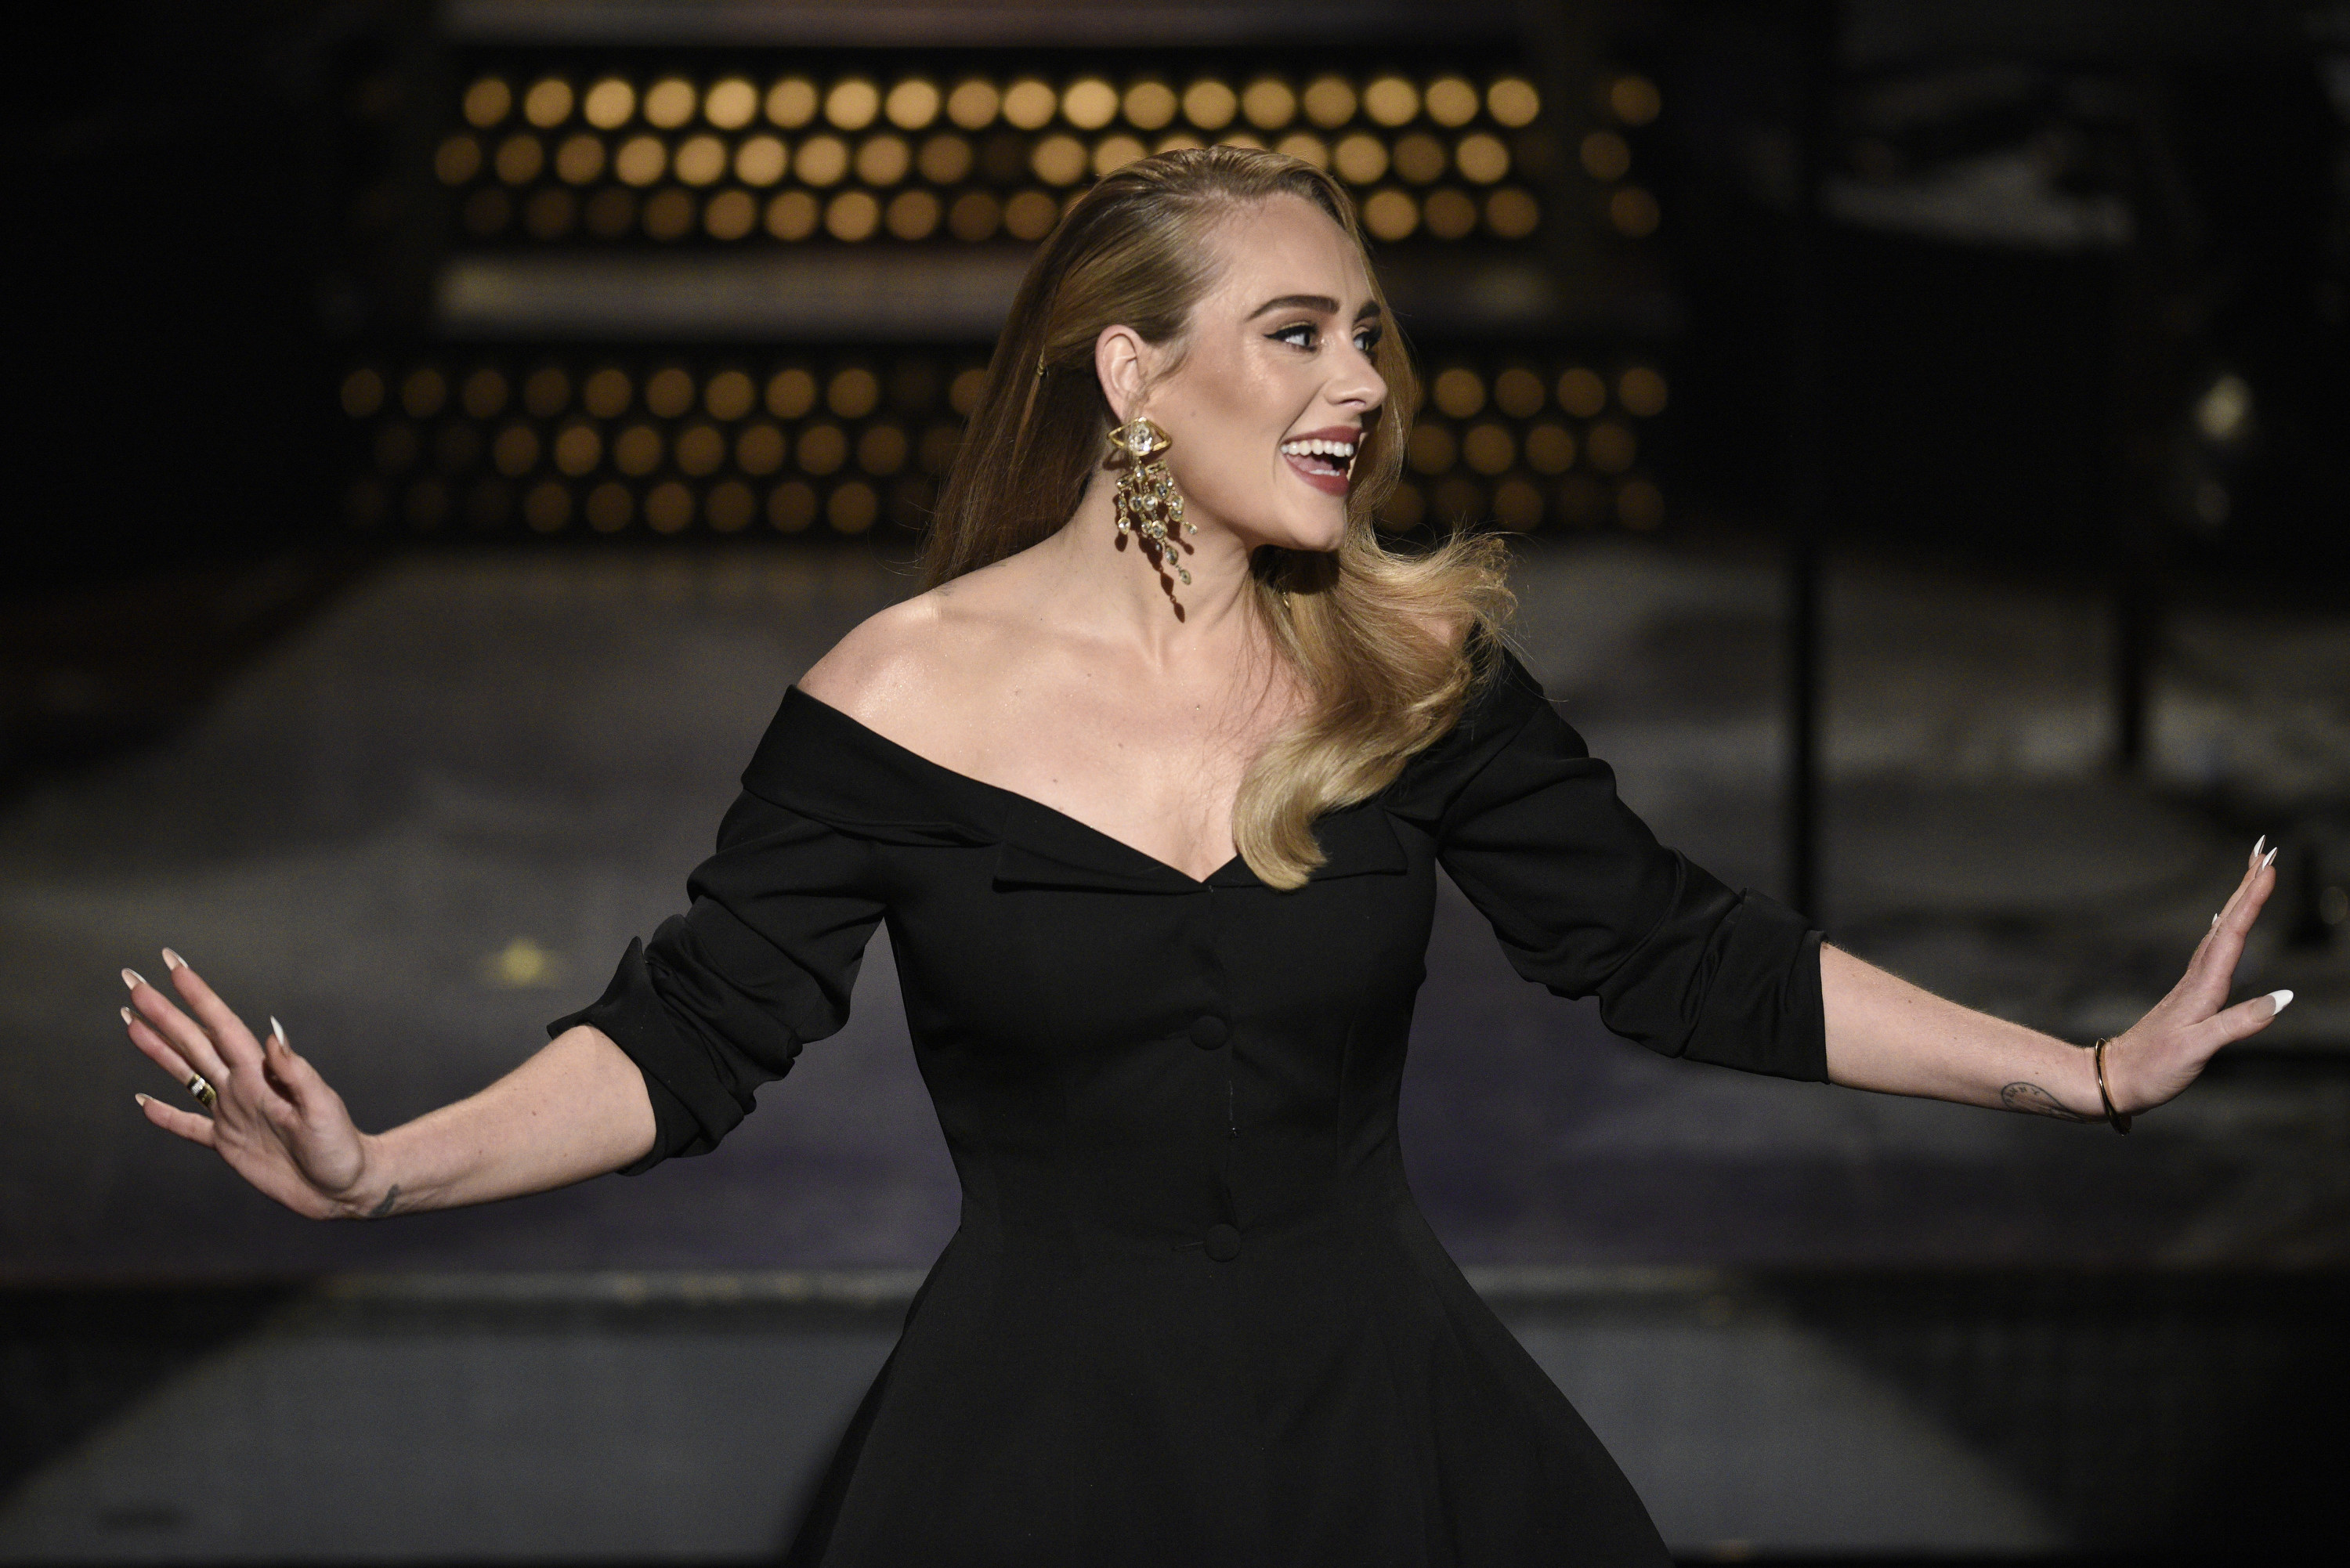 Adele in a black dress smiling on the SNL stage